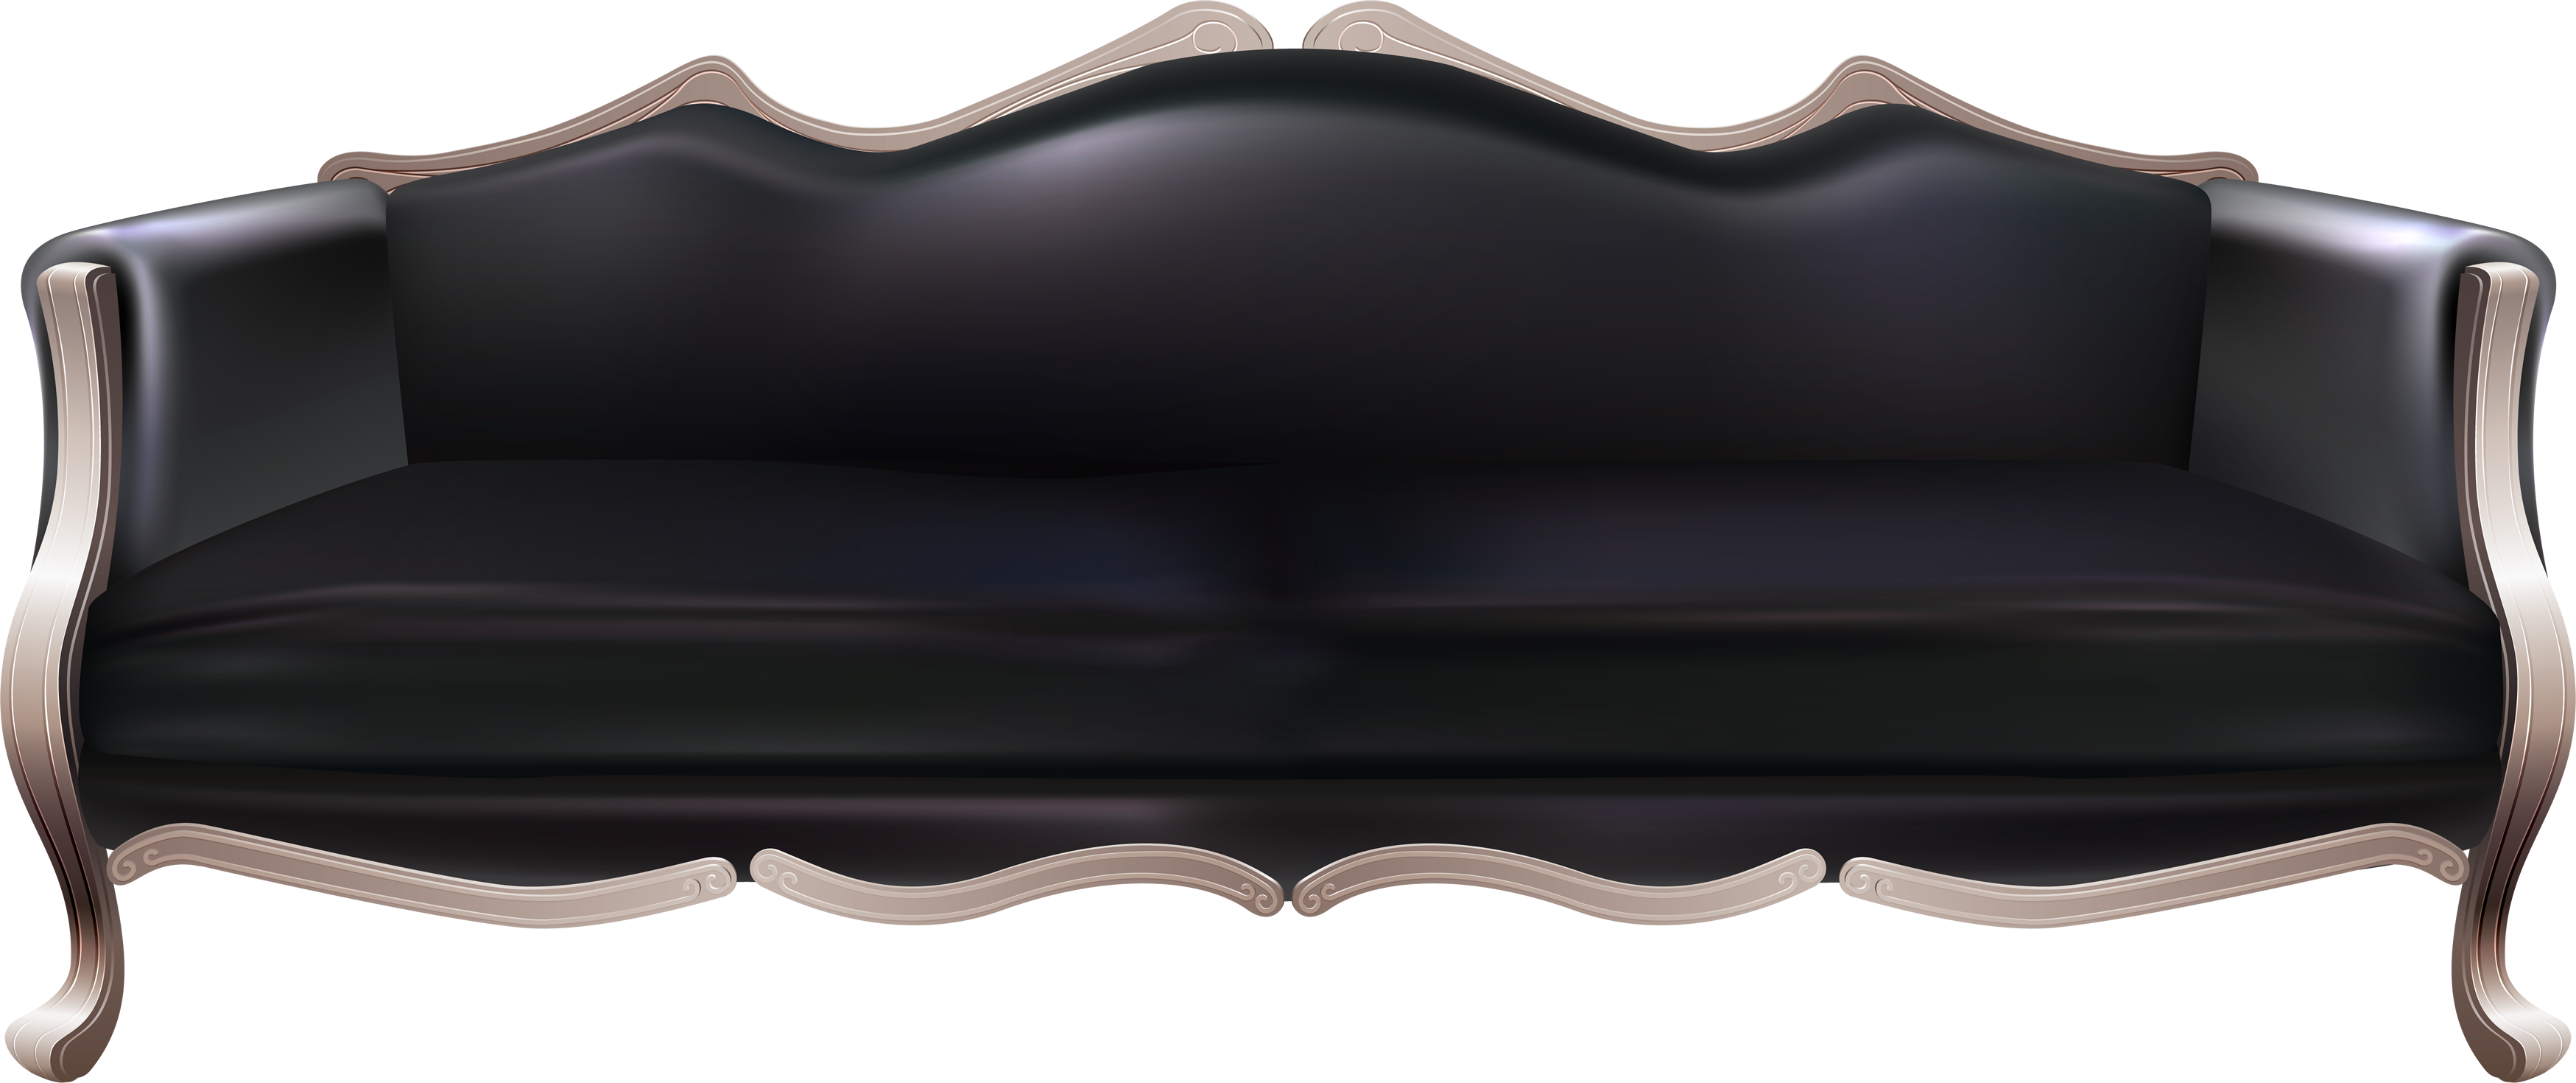 Black Sofa Png Image - Couch, Transparent background PNG HD thumbnail